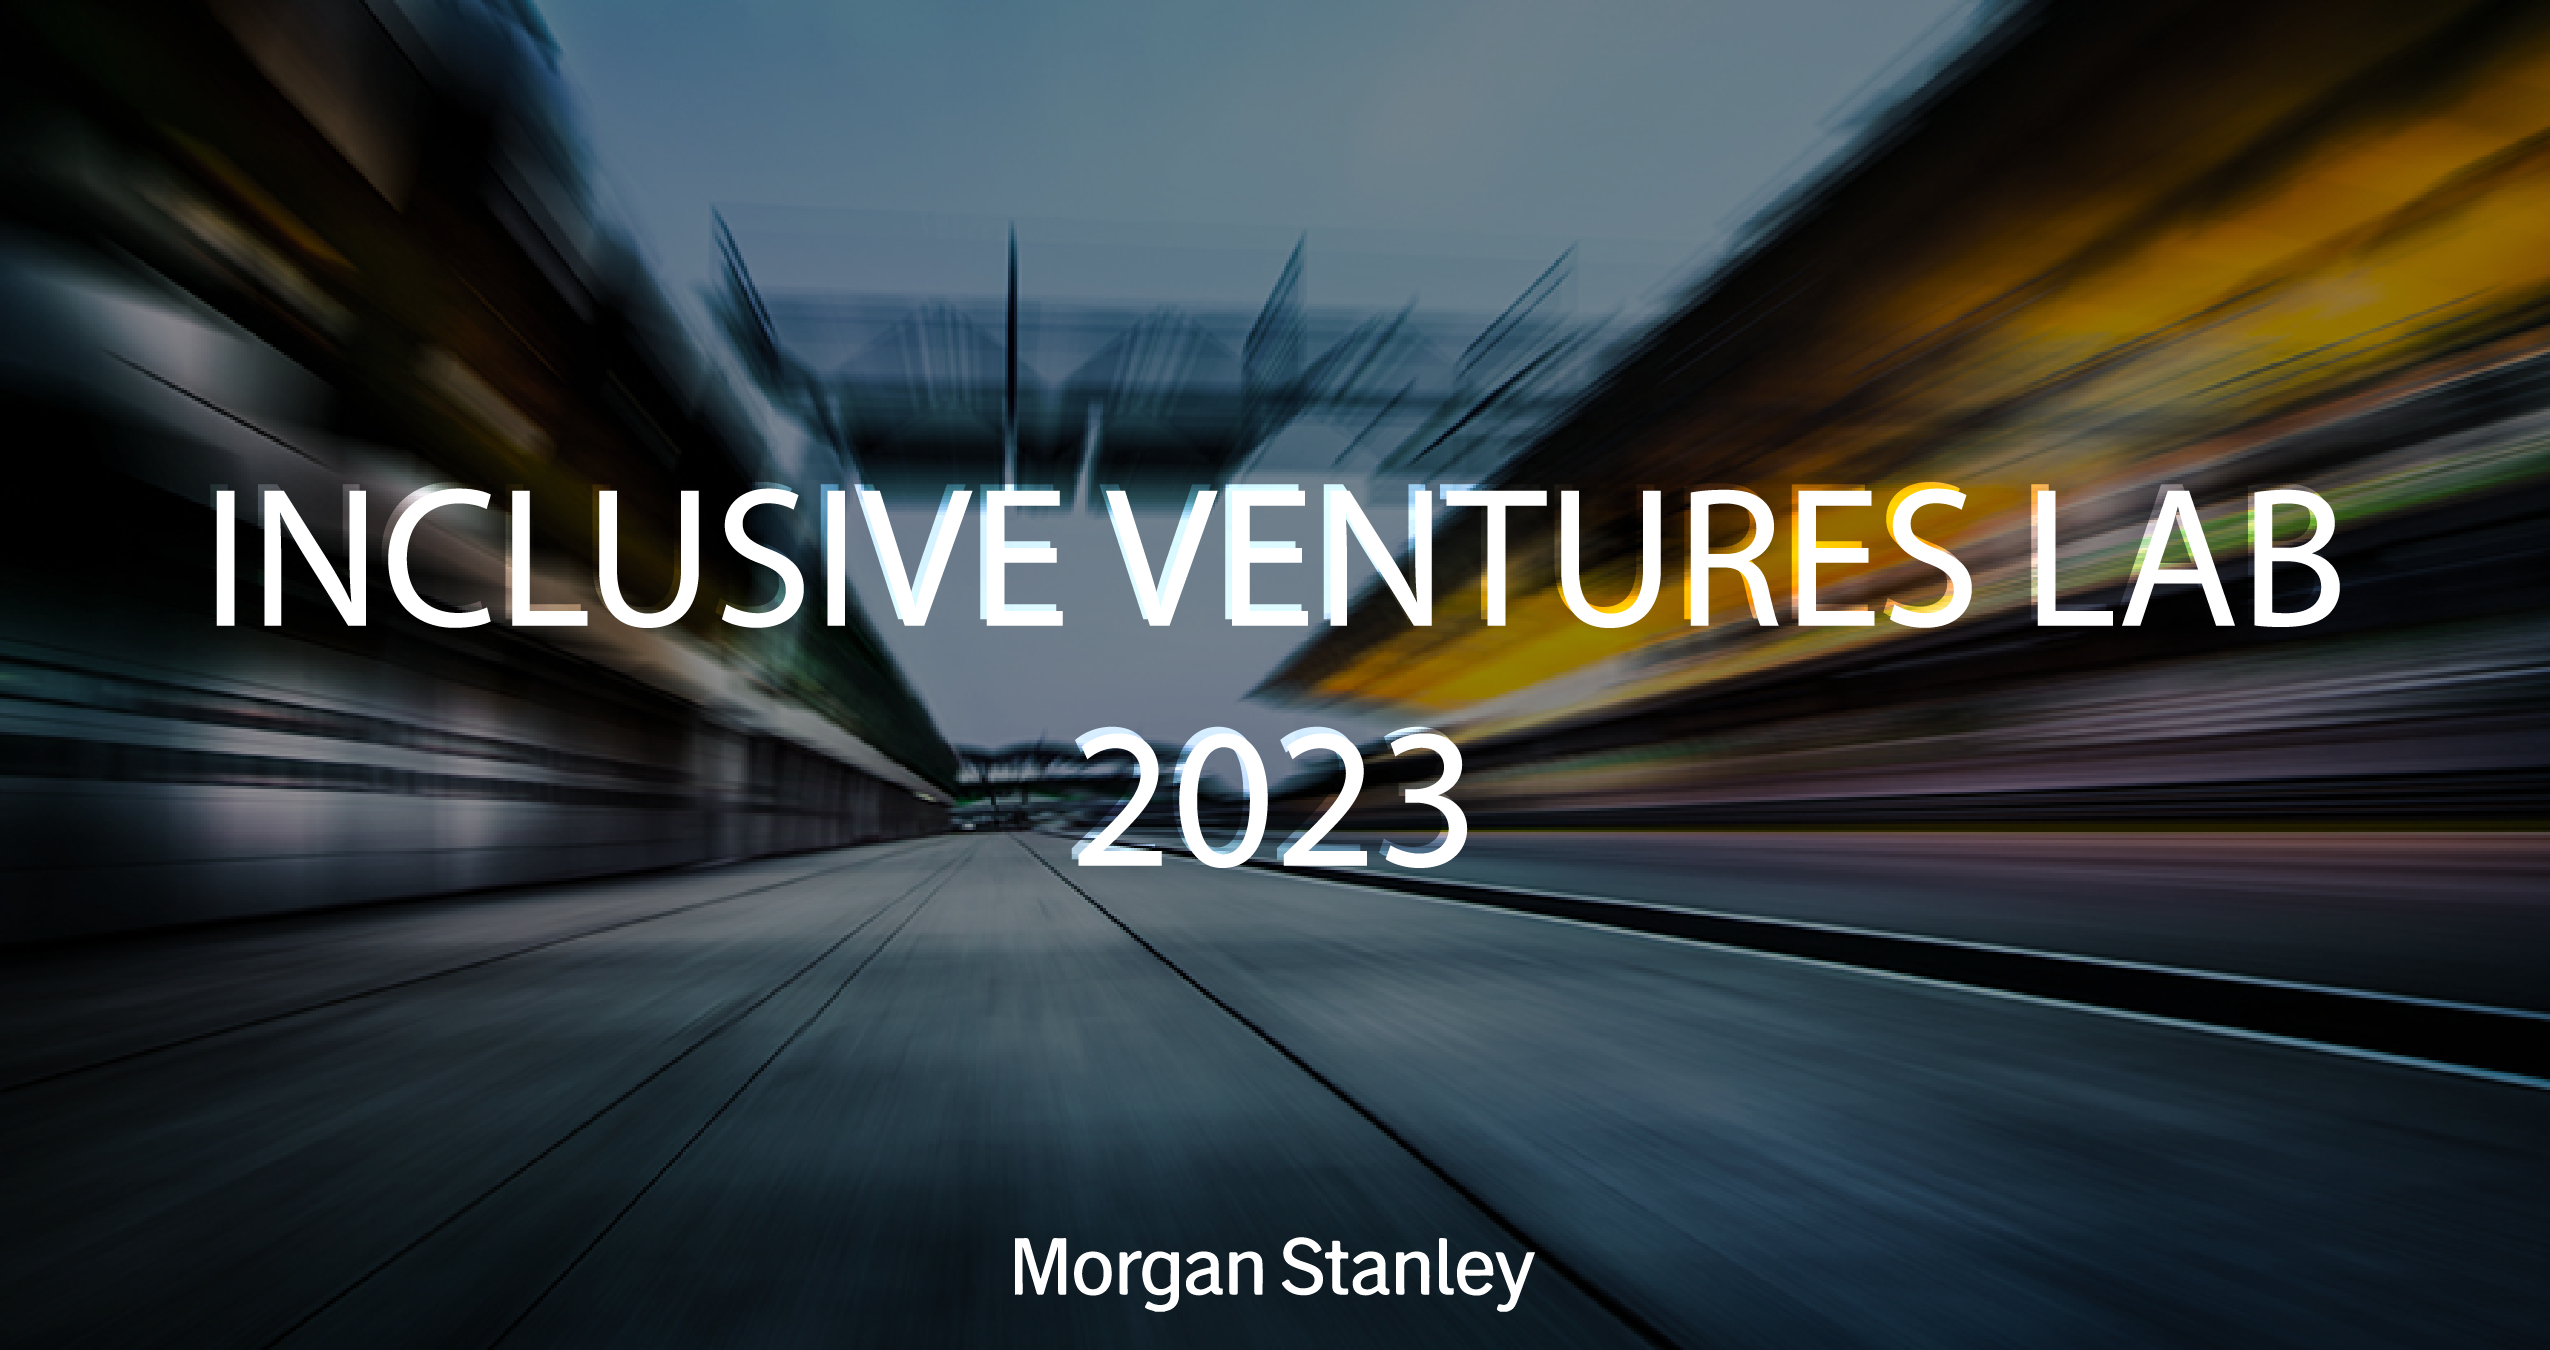 Morgan Stanley Inclusive Ventures Lab 2023 for Startups in Europe, Middle East & Africa (EMEA)